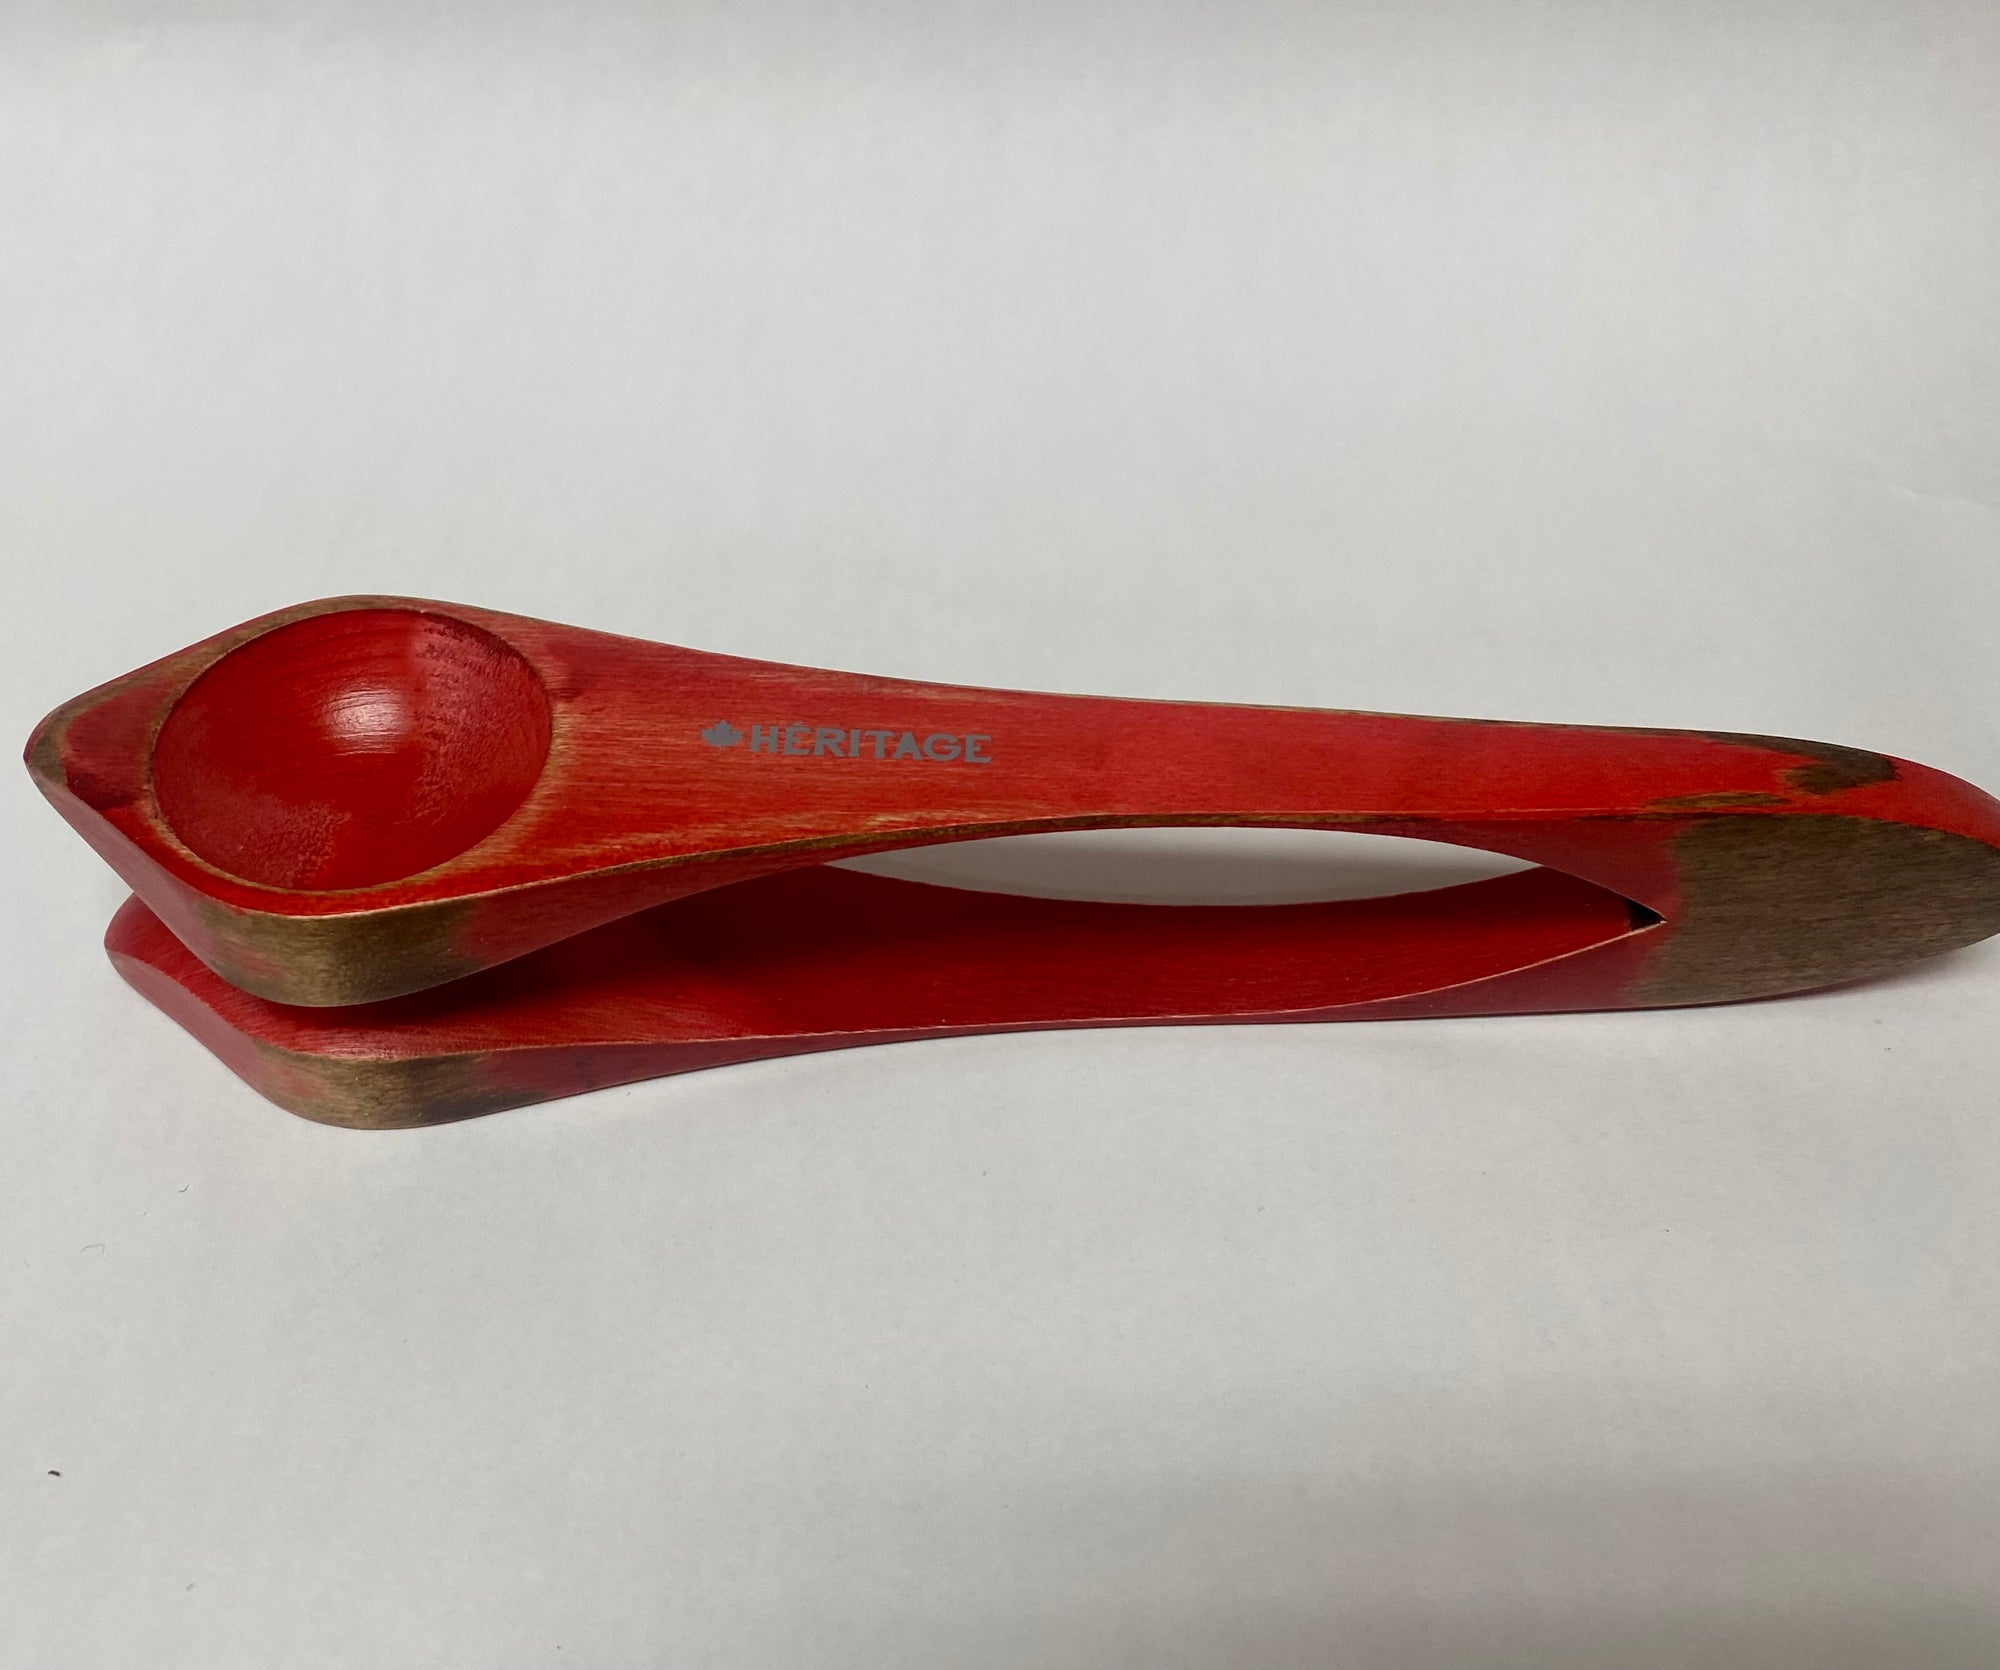 A handmade red Heritage Musical Spoons Medium with a wooden handle.